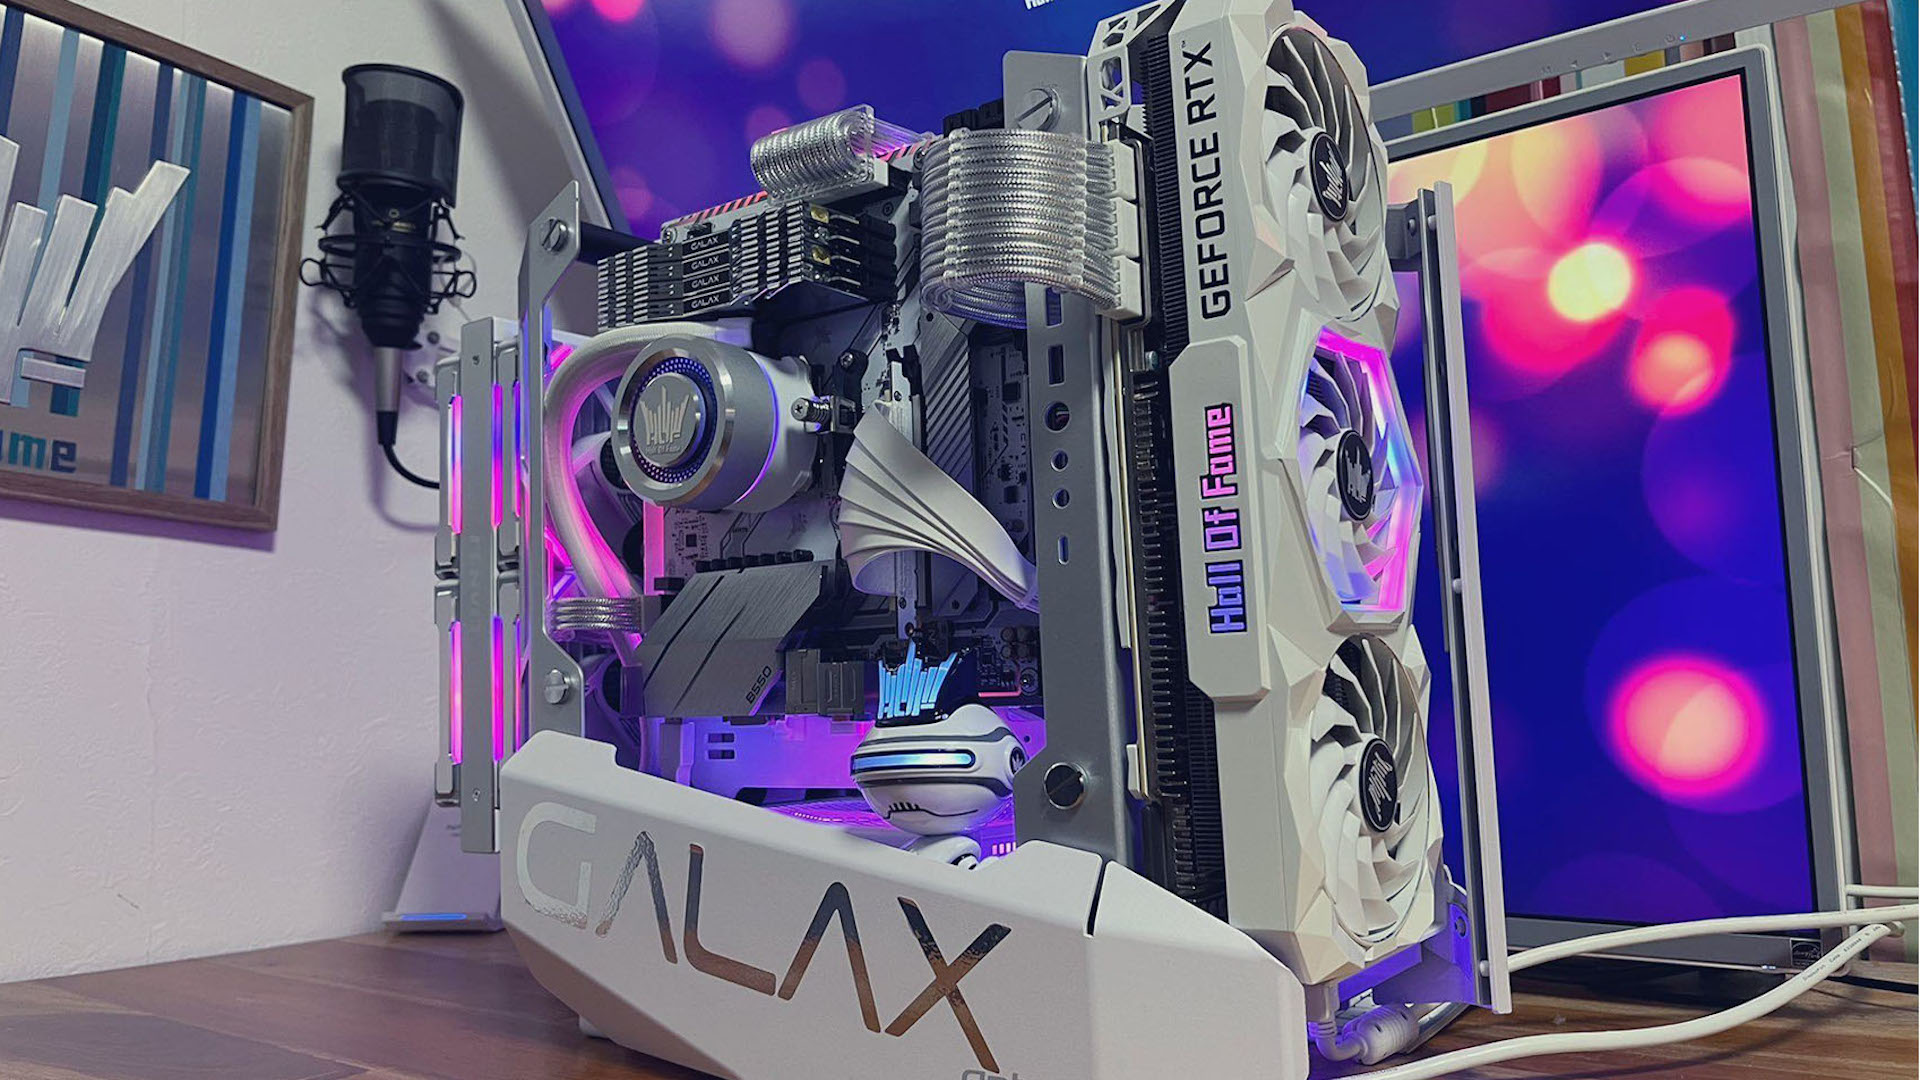 Feast your eyes on this stripped back Antec Striker gaming PC build